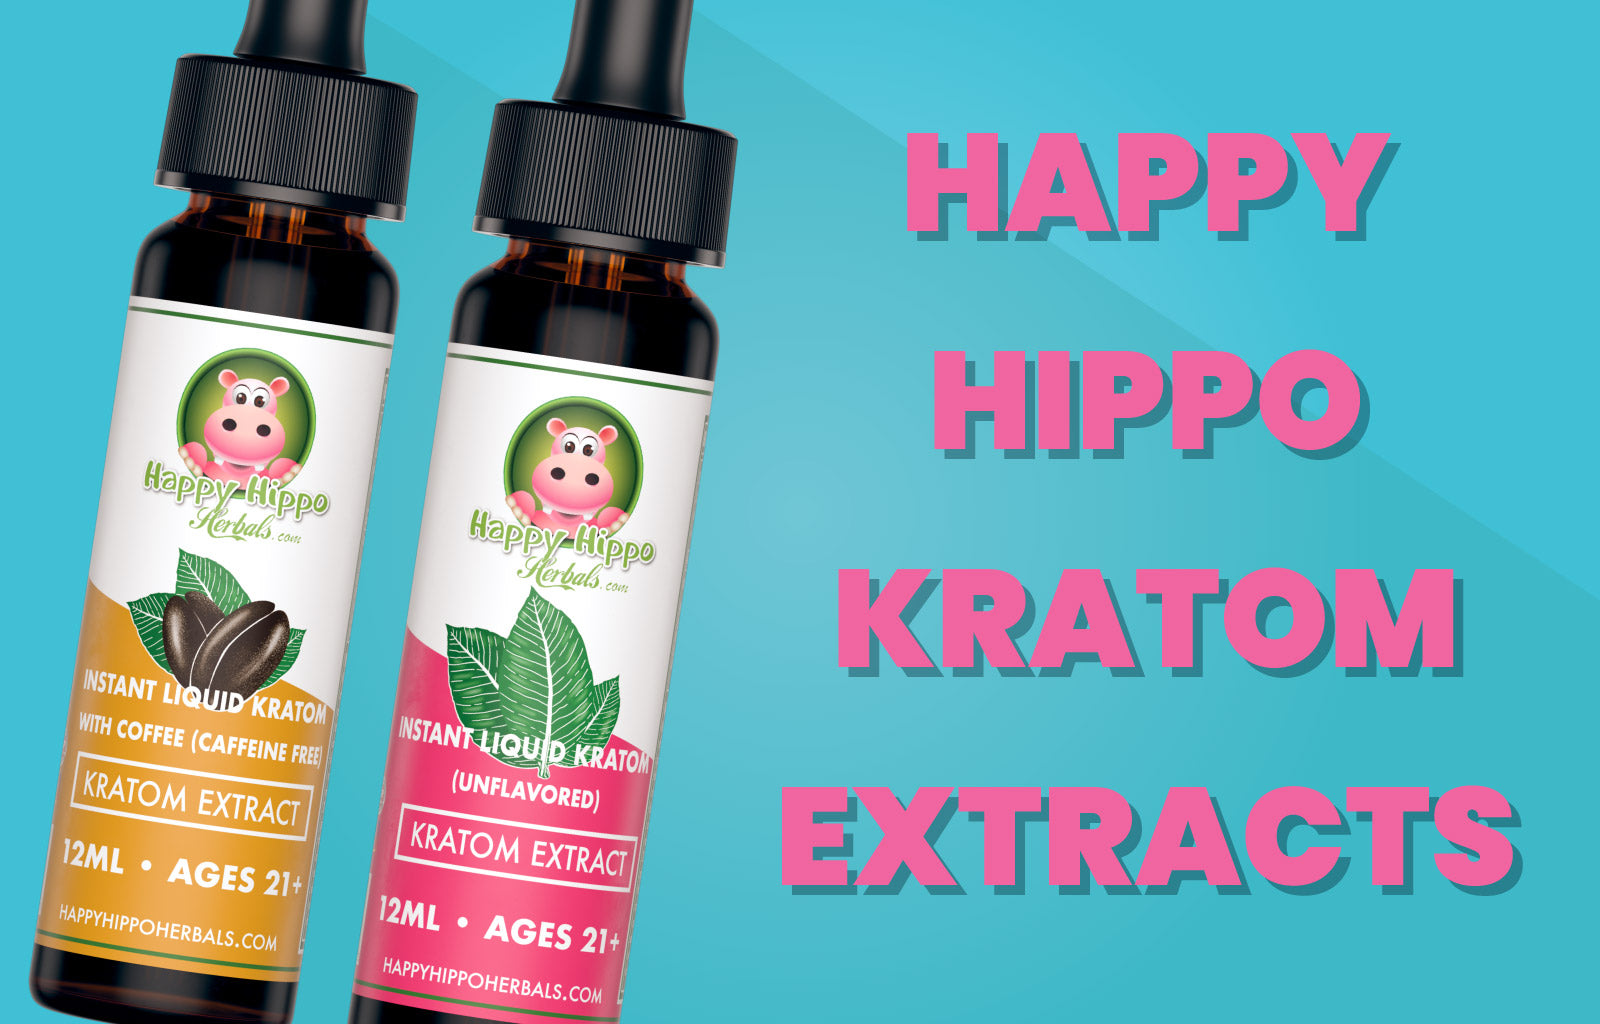 Featured Image depicting two bottles of Happy Hippo Brand kratom extract. One Unflavored, and one Coffee Flavor.